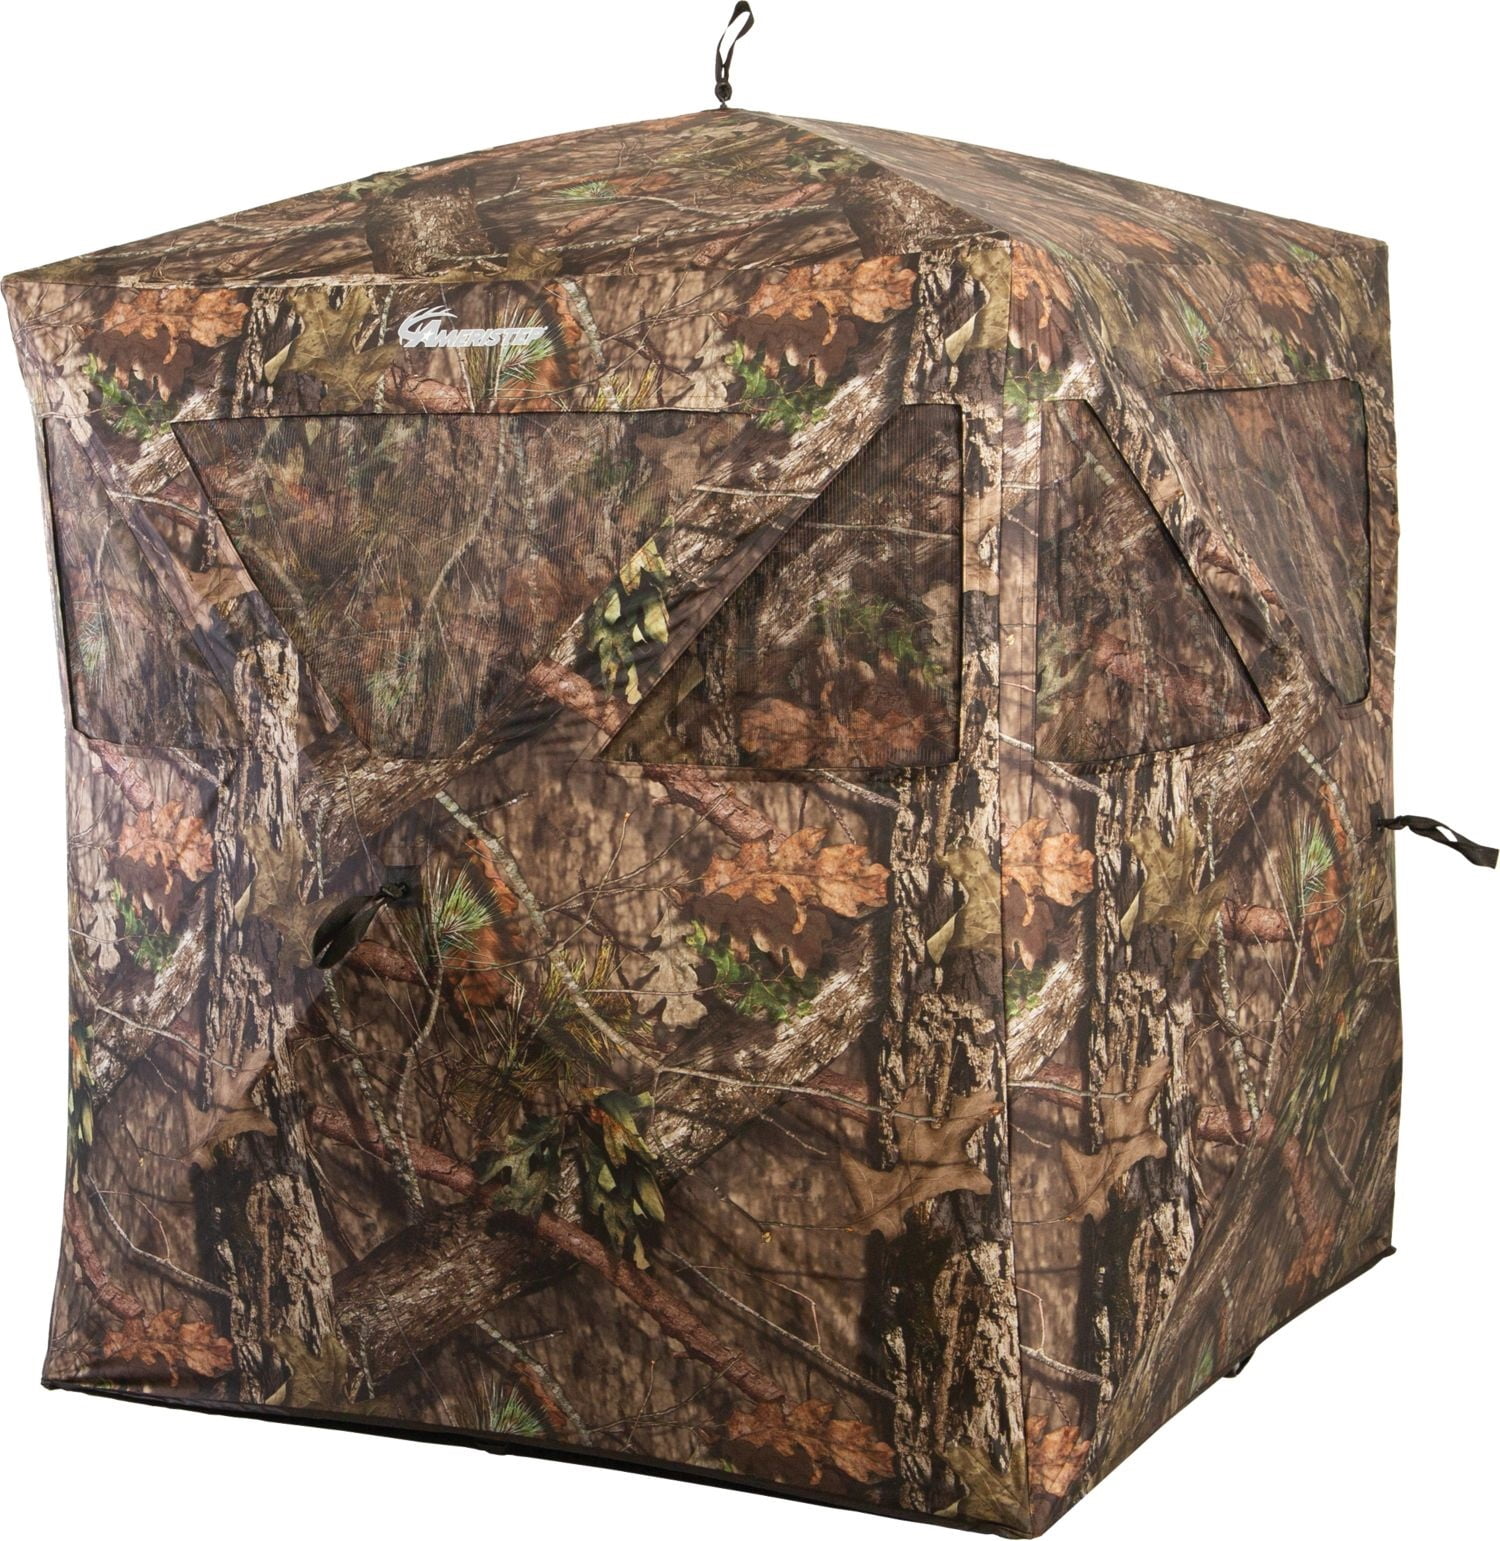 Ground Hunting Blind Portable Pop Up Camo Hunter Weather Proof Hub Concealment 